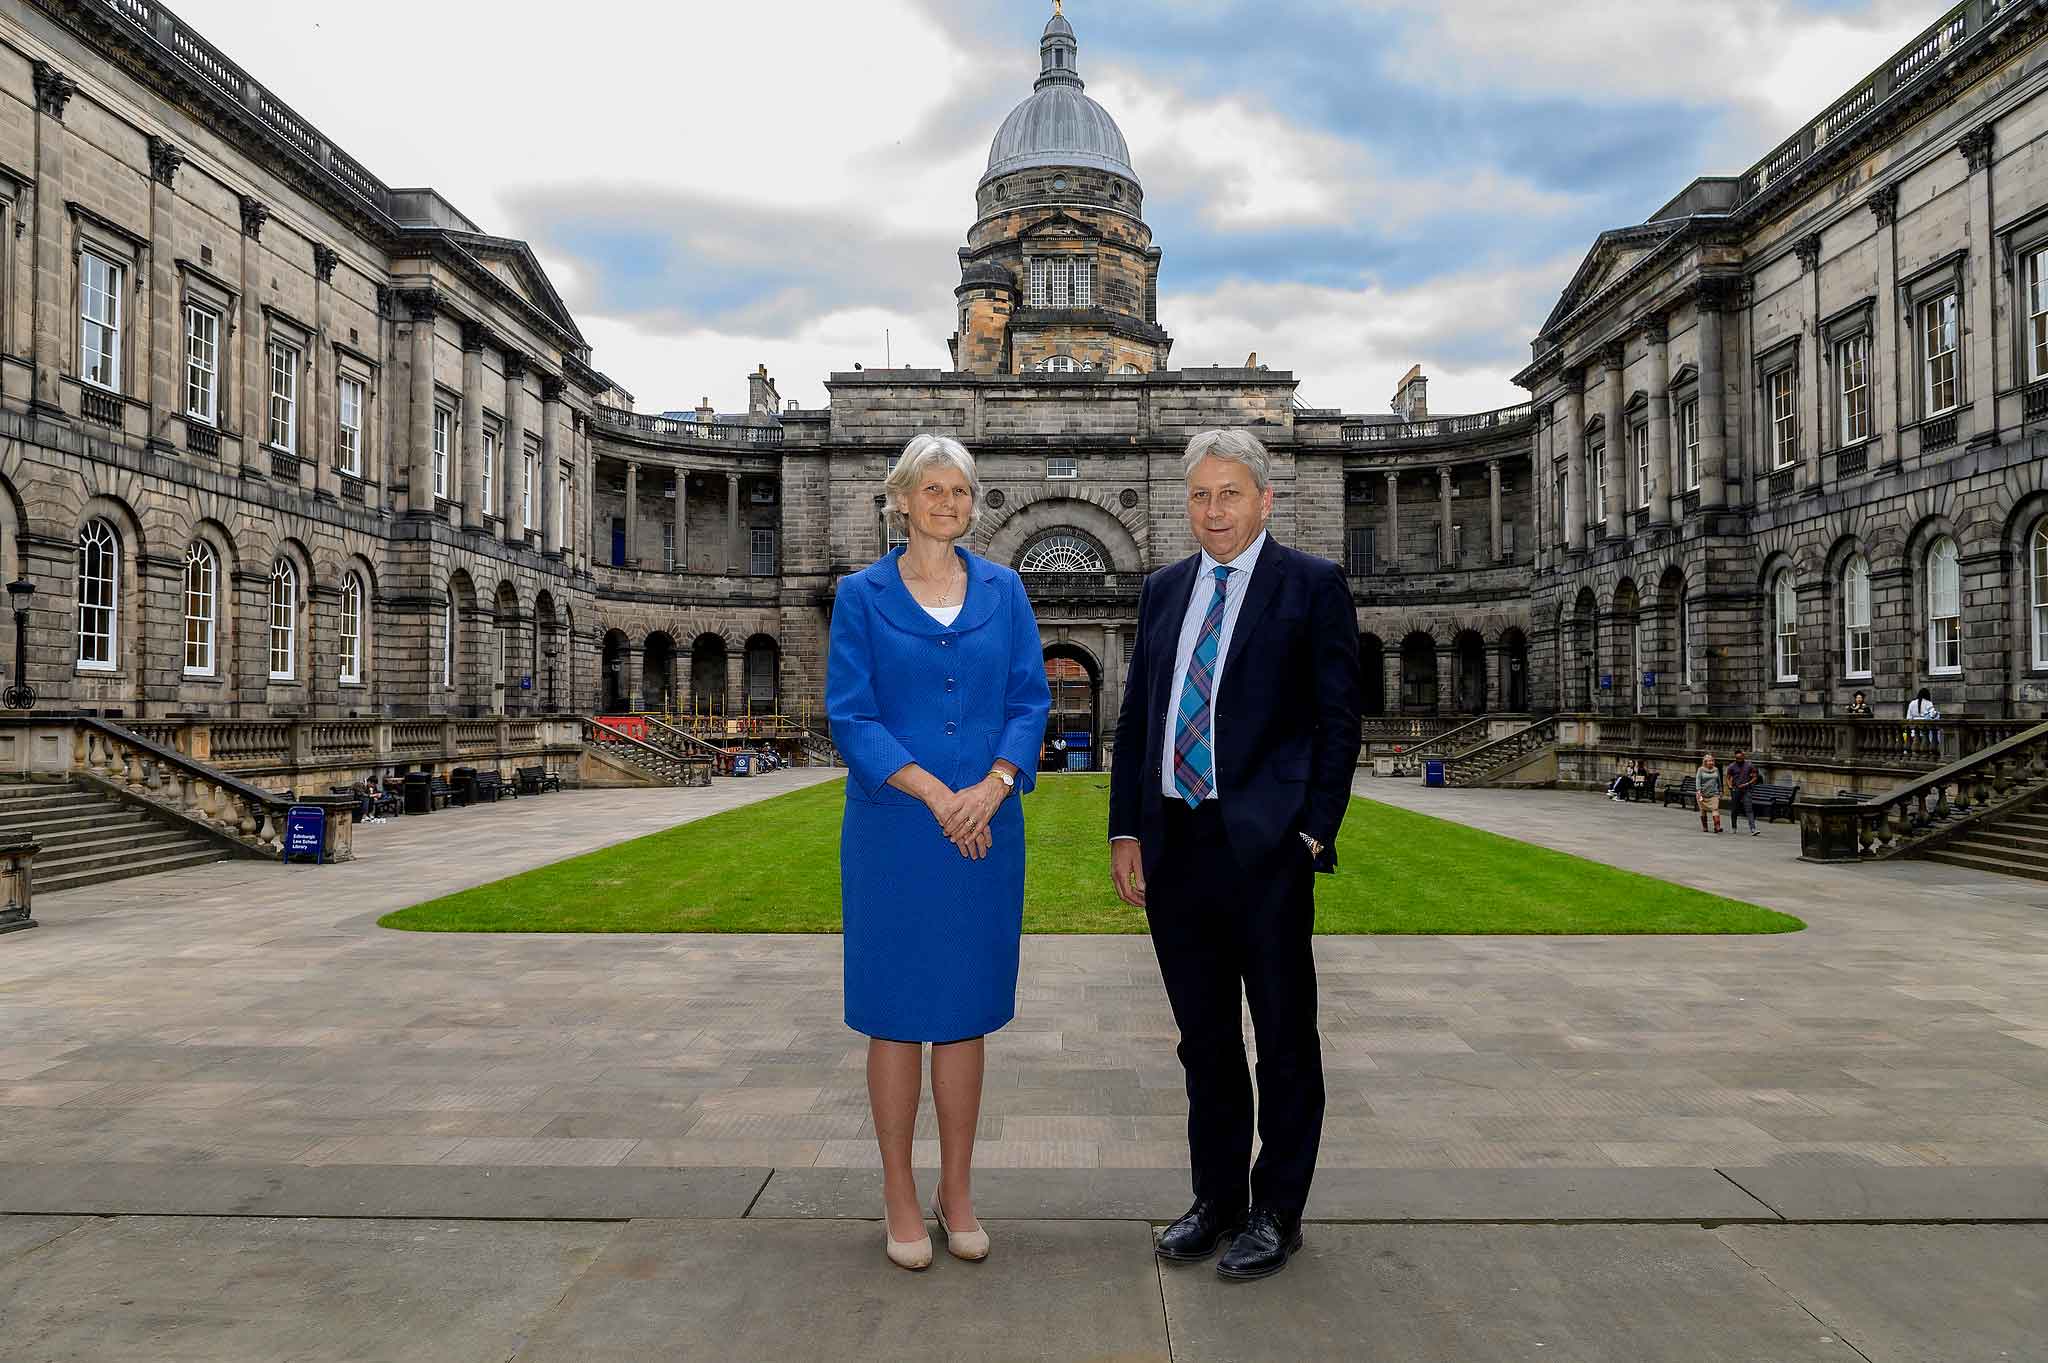 President Bradley with Principal and Vice-Chancellor Peter Mathieson standing side by side at the University of Edinburgh in Scotland